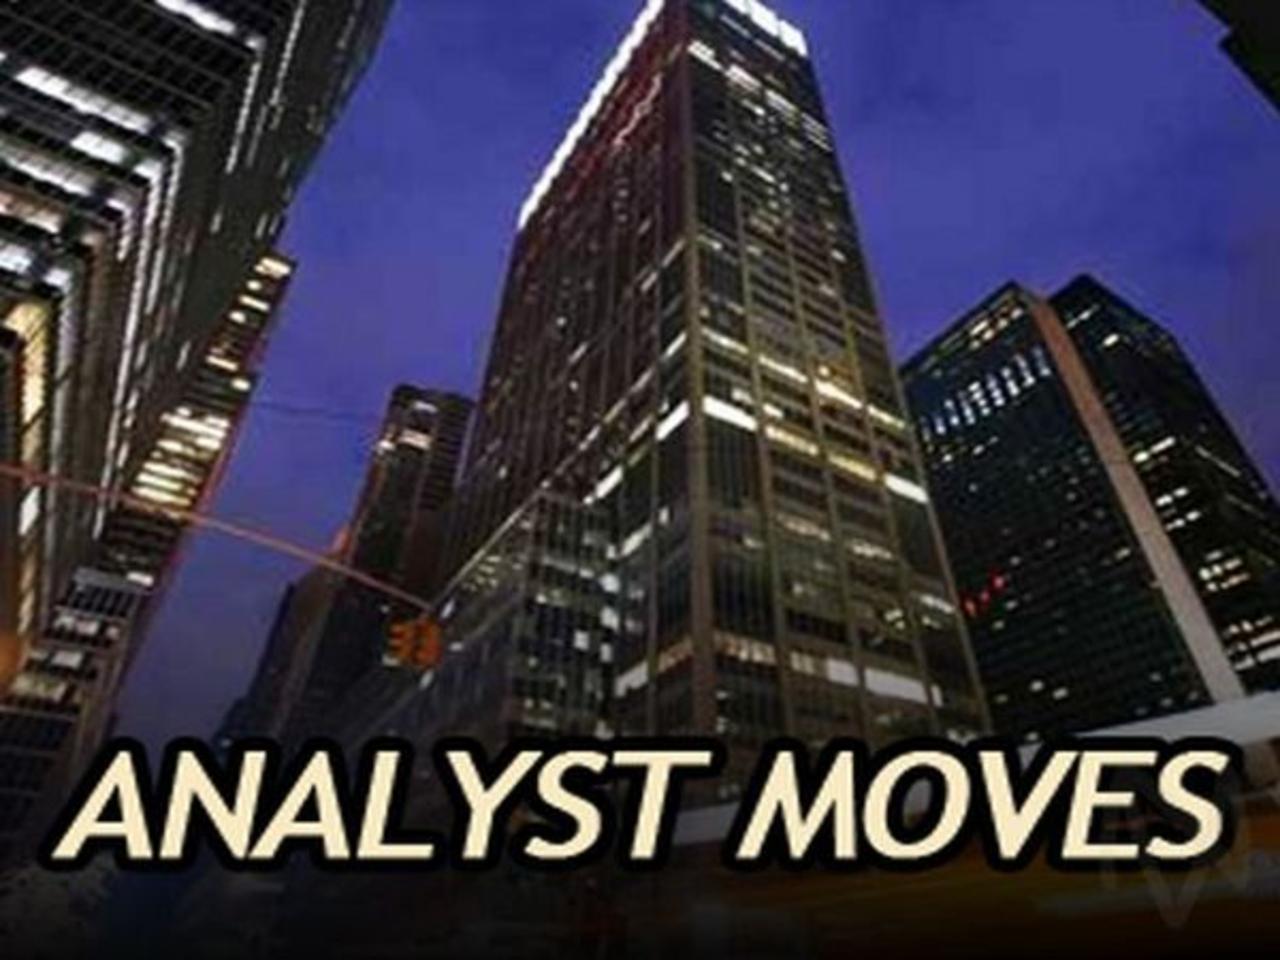 Dow Analyst Moves: INTC